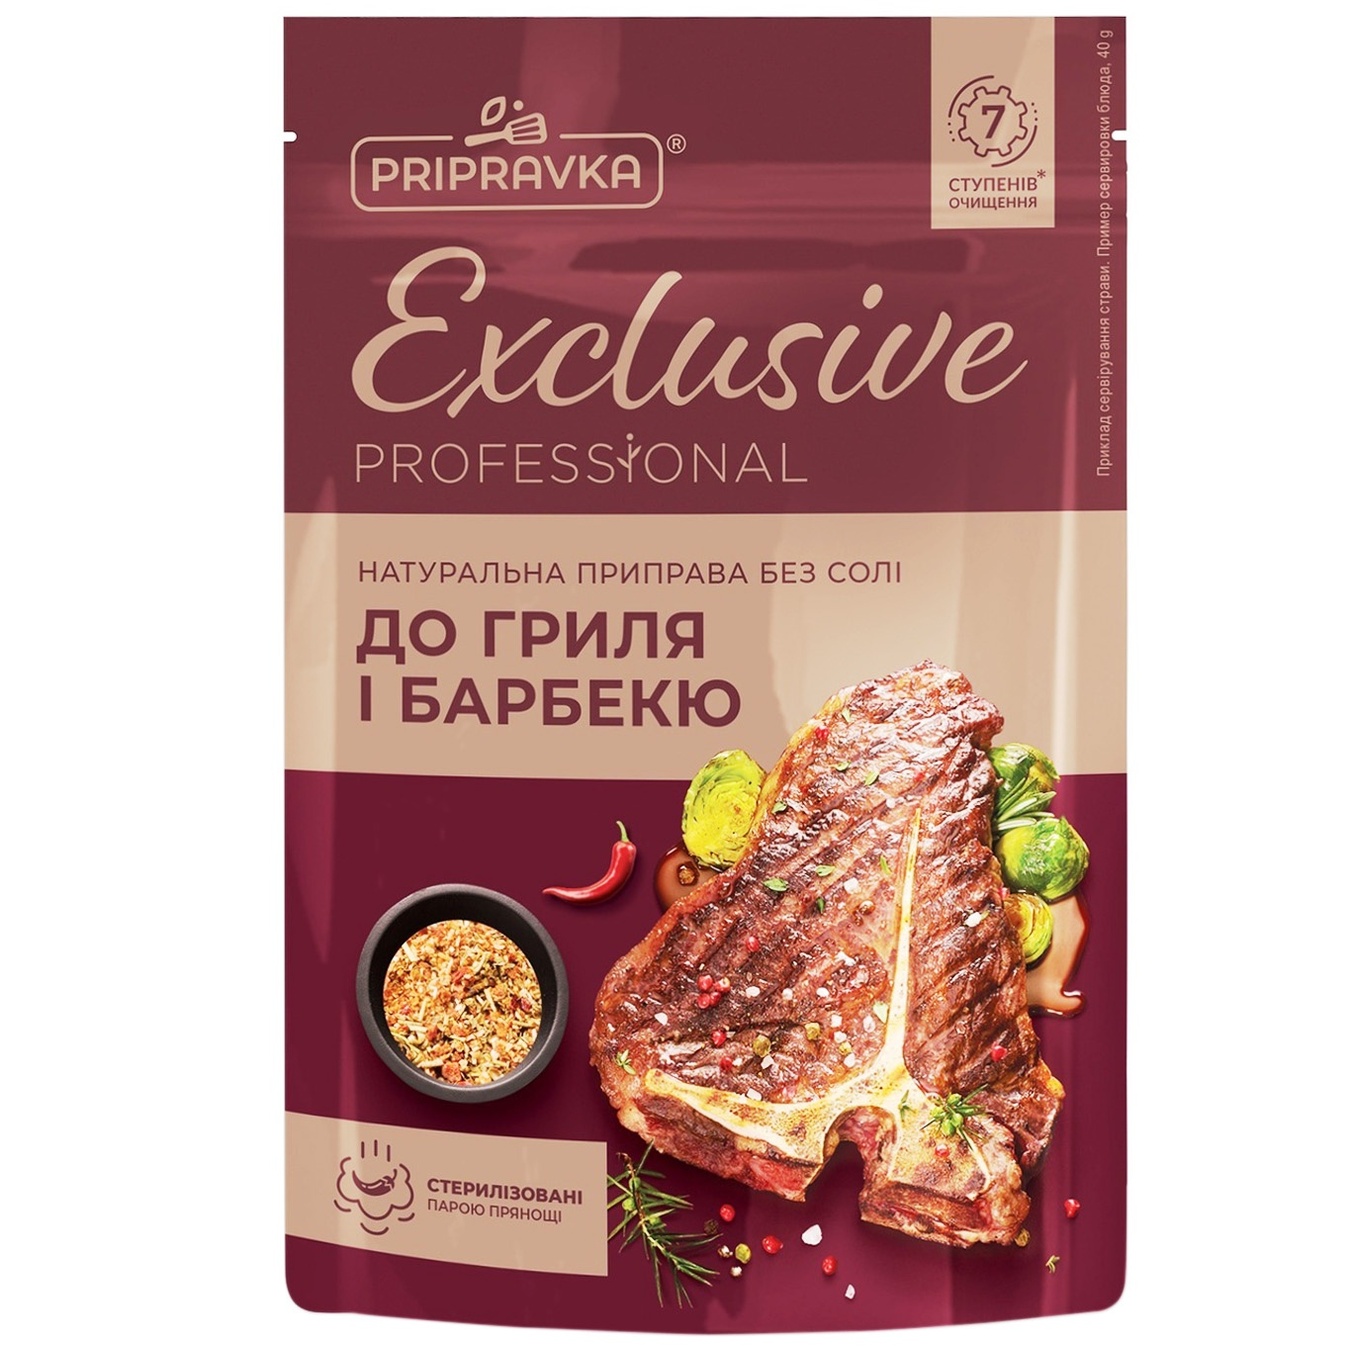 Pripravka Exclusive Professional For Grill And Barbecue Natural Without Salt Seasoning 40g